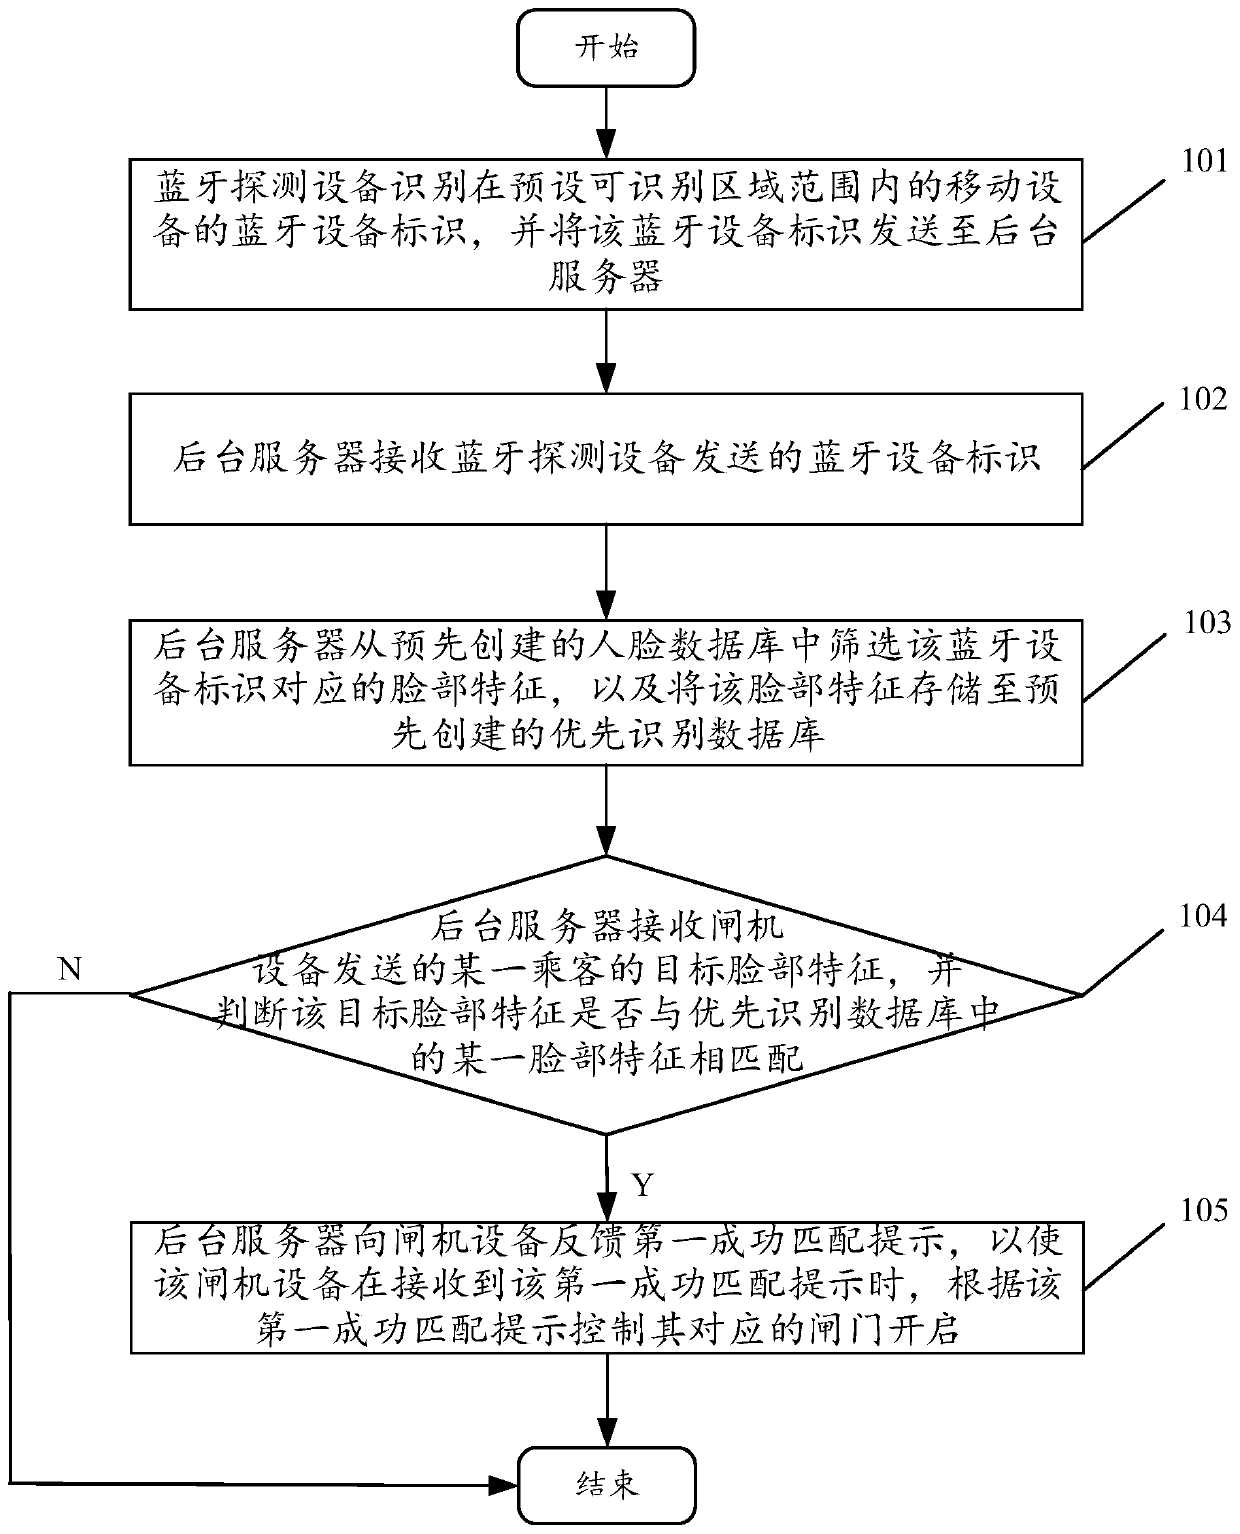 Face-scanning authentication method and device based on Bluetooth function